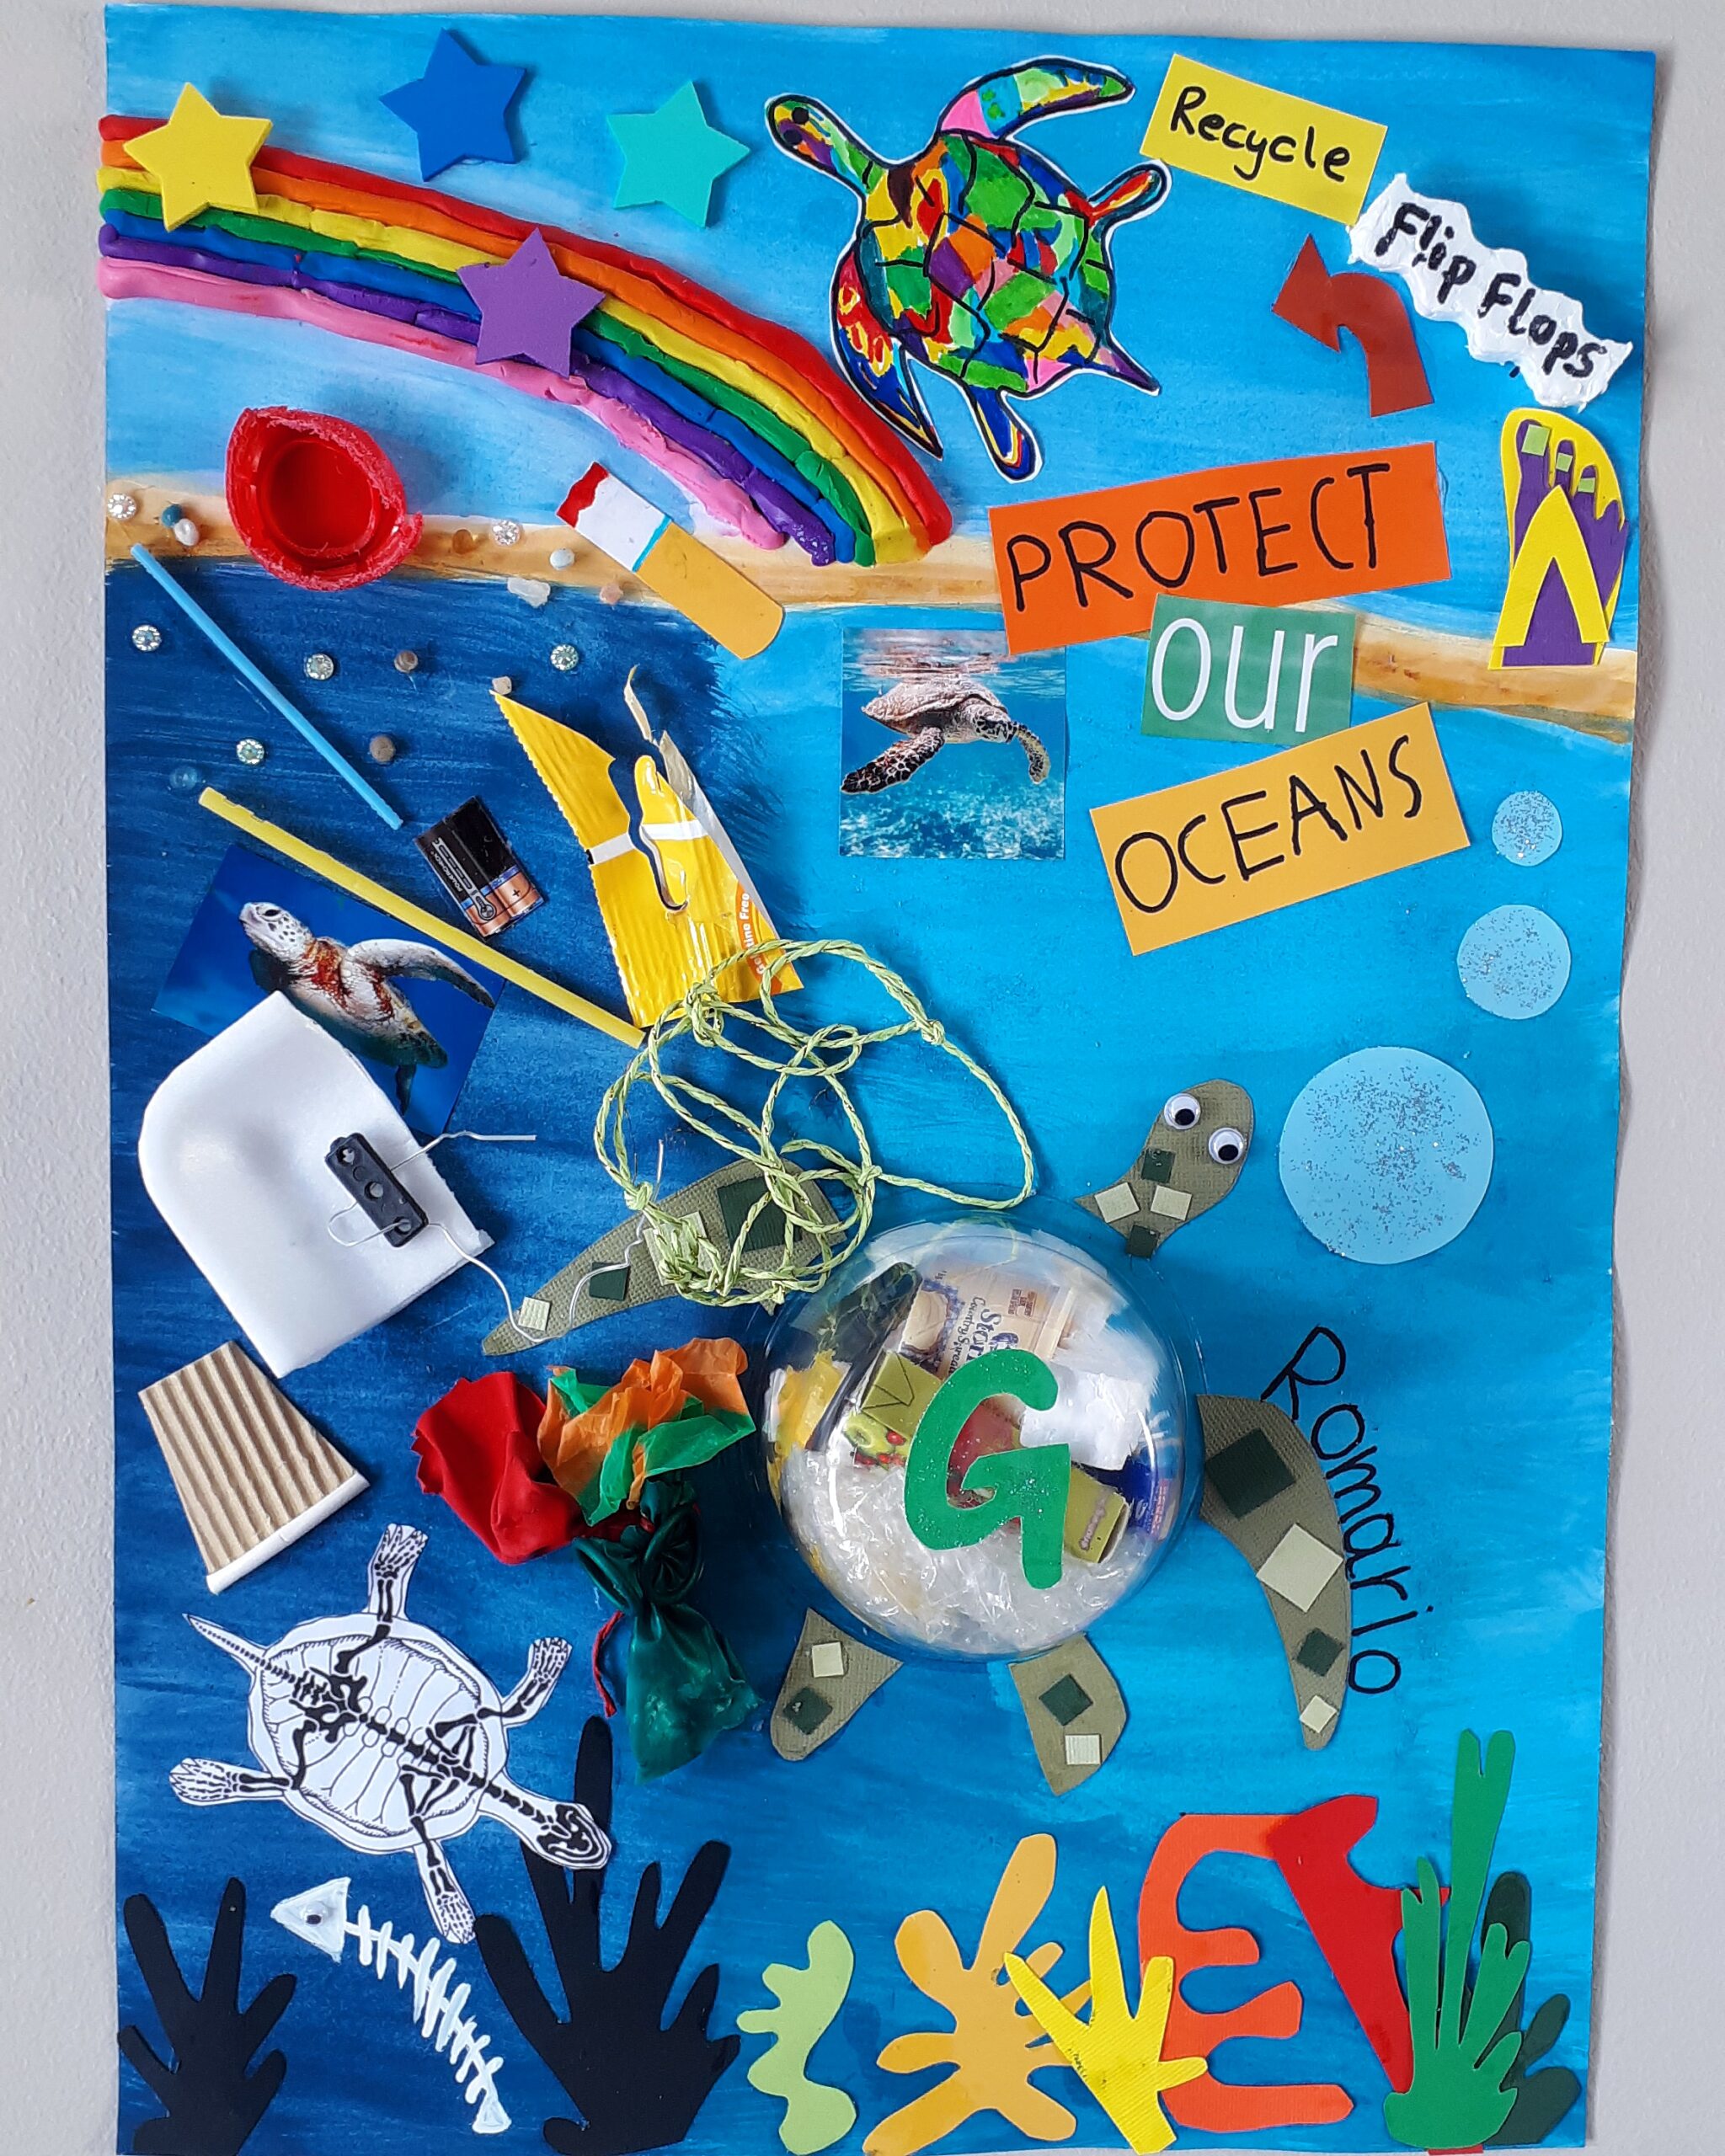 A striking collage poster featuring a 'Protect our oceans' slogan, pieces of single-use plastic, a plasticine rainbow, various turtles, a fish skeleton and colourful seaweed